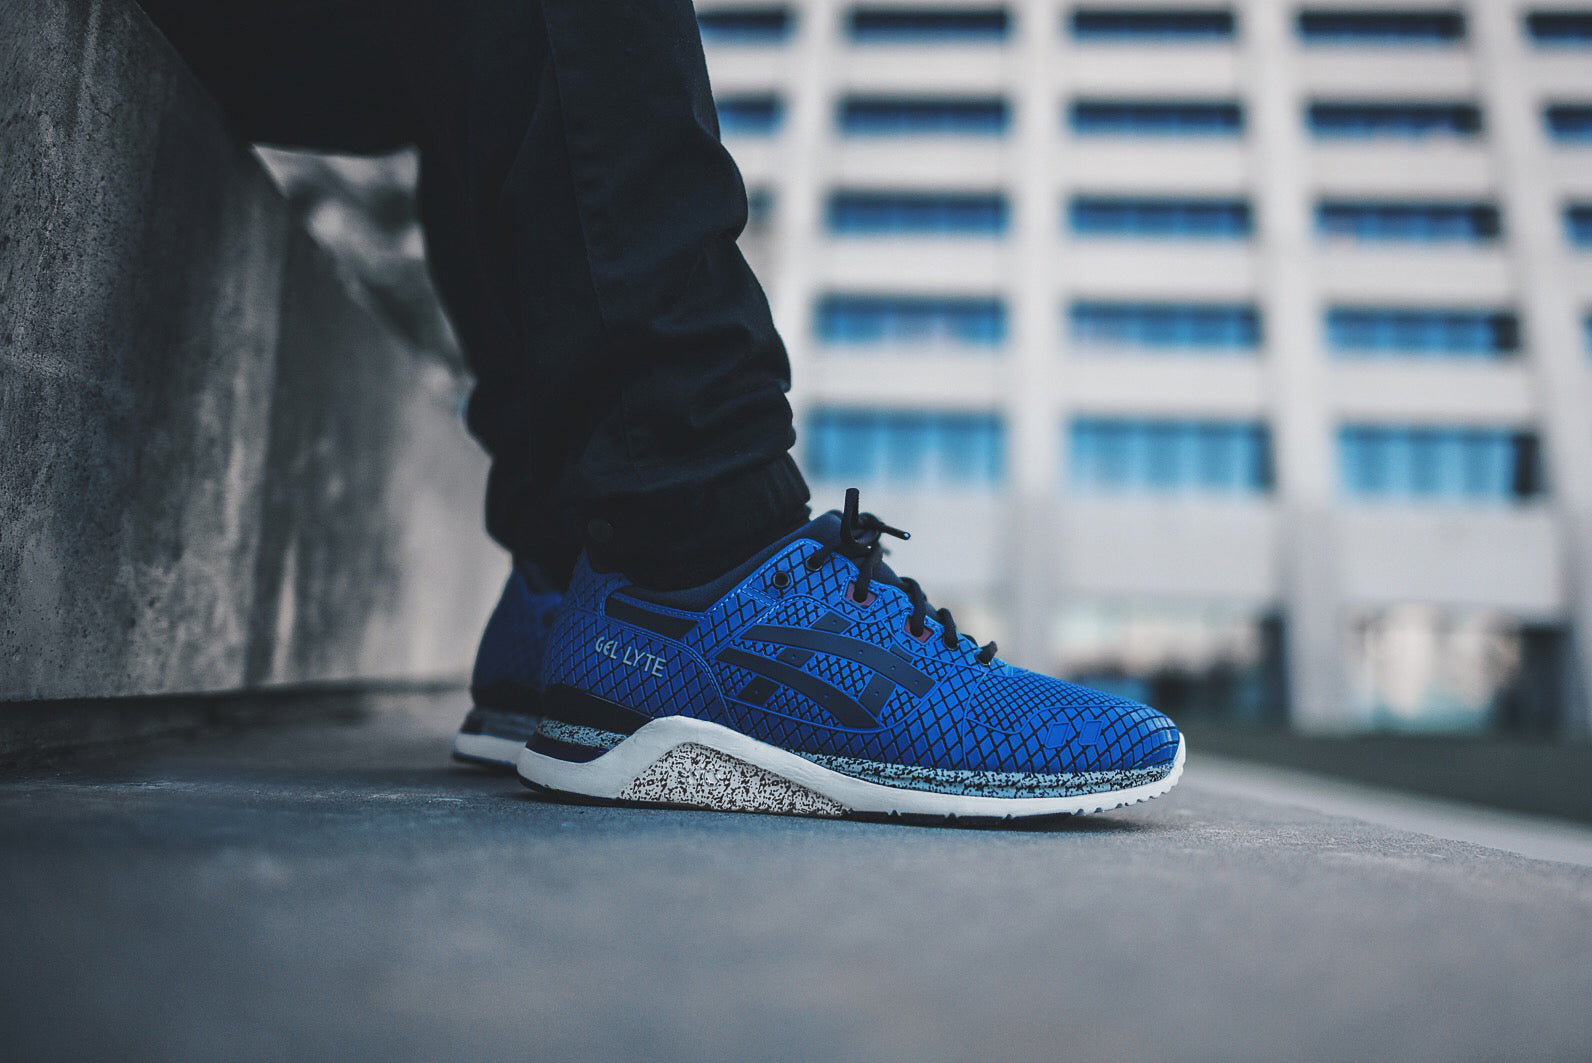 Asics Gel Lyte EVO Collection" by KITH Kith